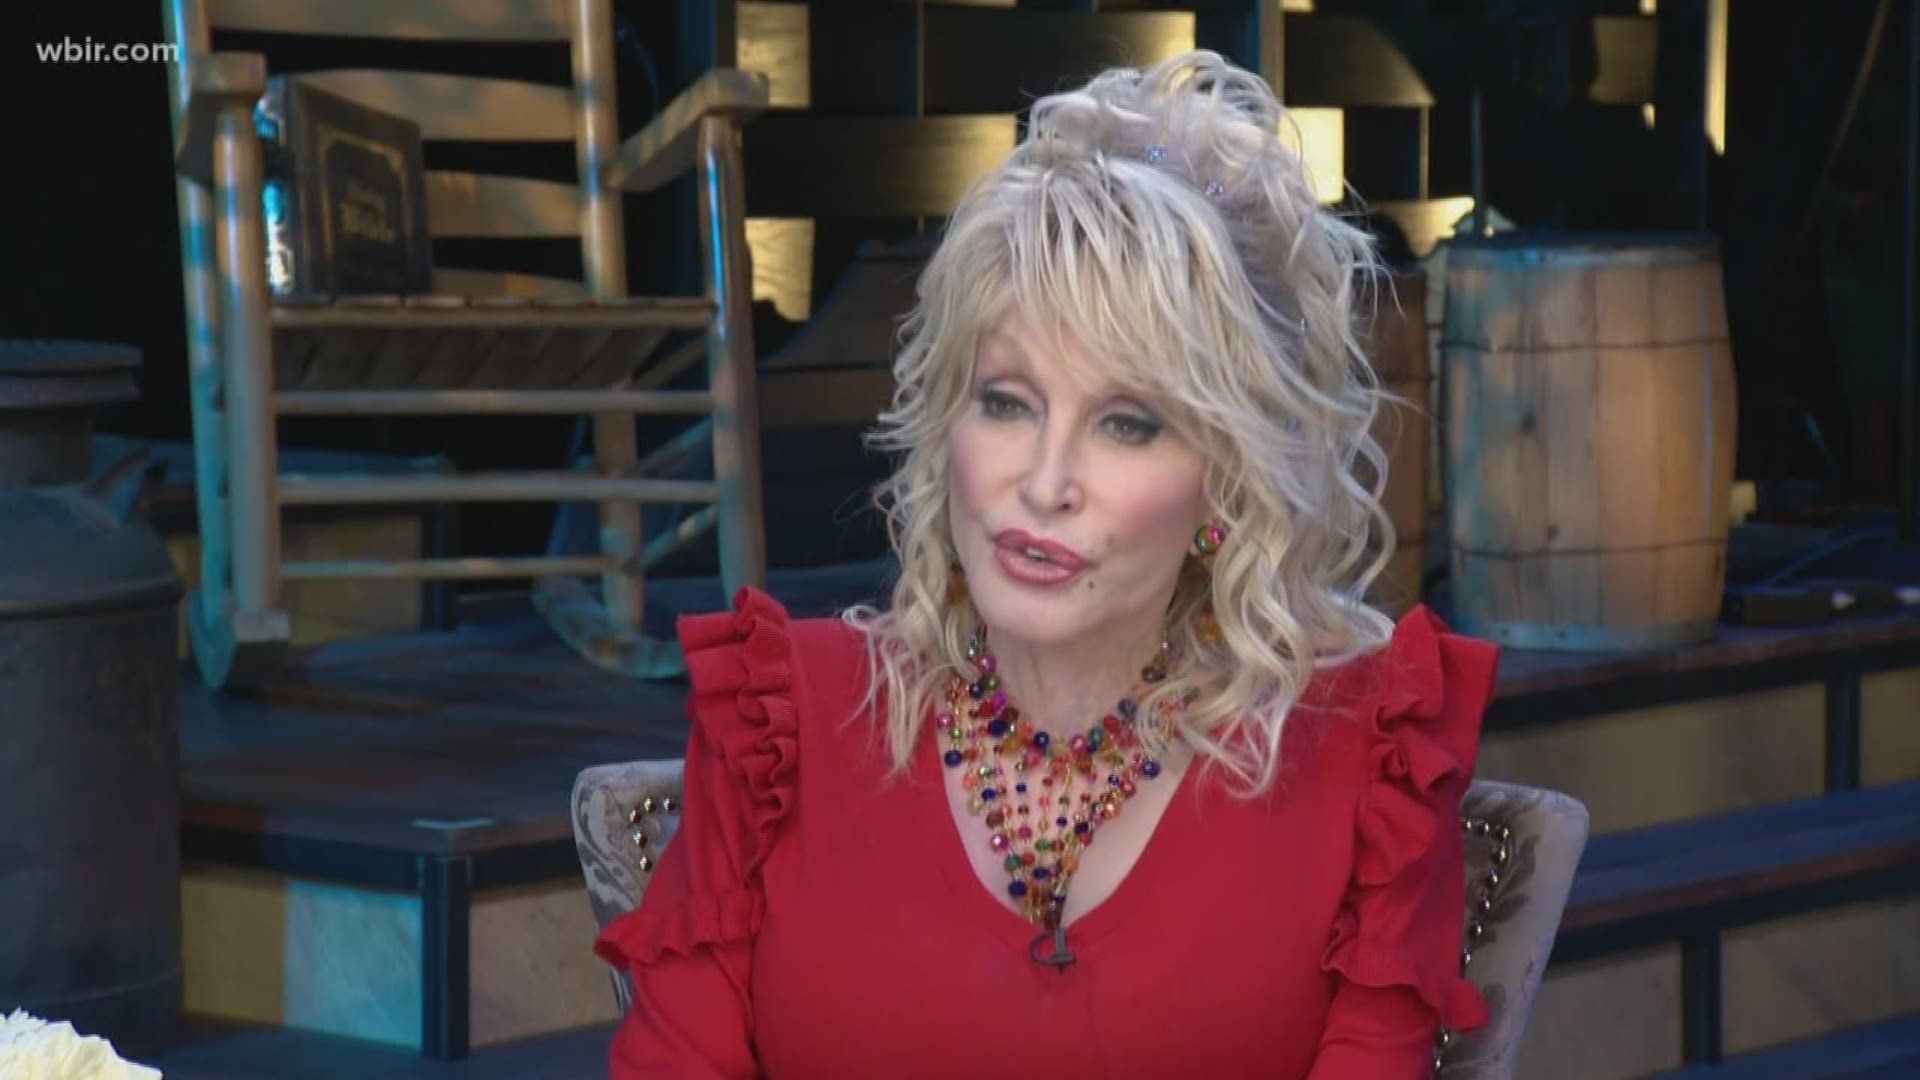 "As we become more and more disconnected as people, as you know we are, it's more important than ever that we continue to reach out and to remind ourselves that music is truly an international language," Parton said. "It brings people closer together. I've always called it the voice of the soul. I really believe this is a wonderful way to make friends from all over the world."